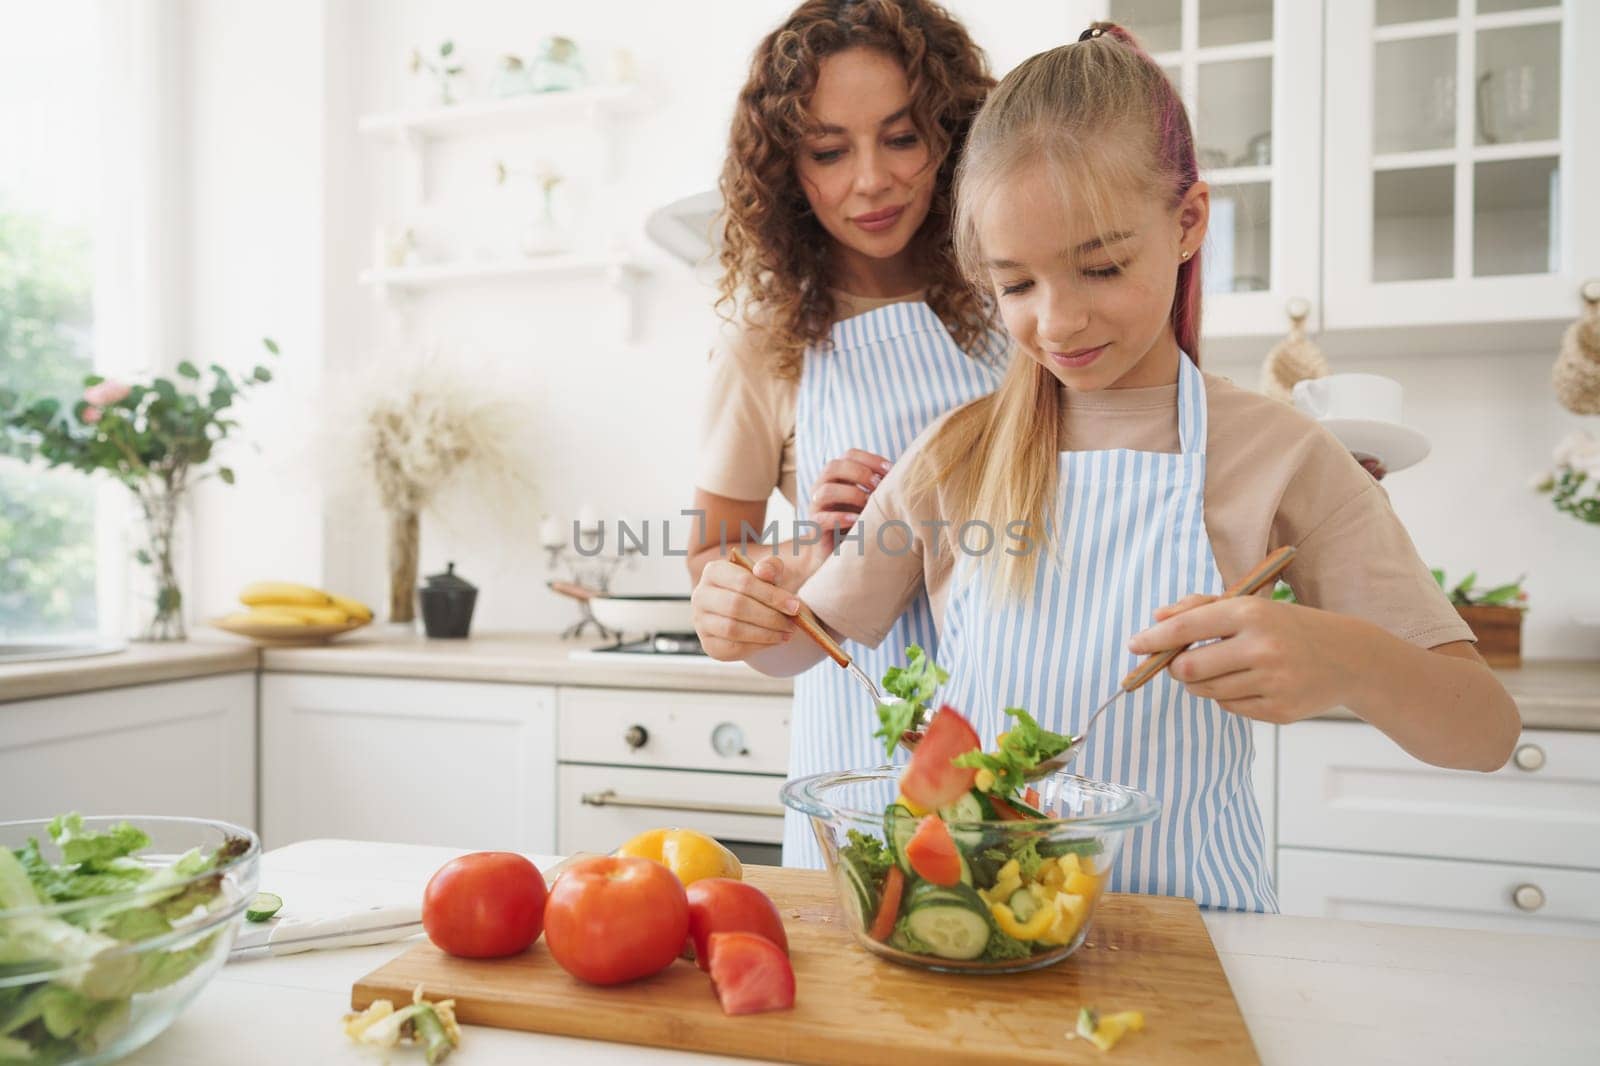 Mommy teaching her teen daughter to cook vegetable salad in kitchen, close up